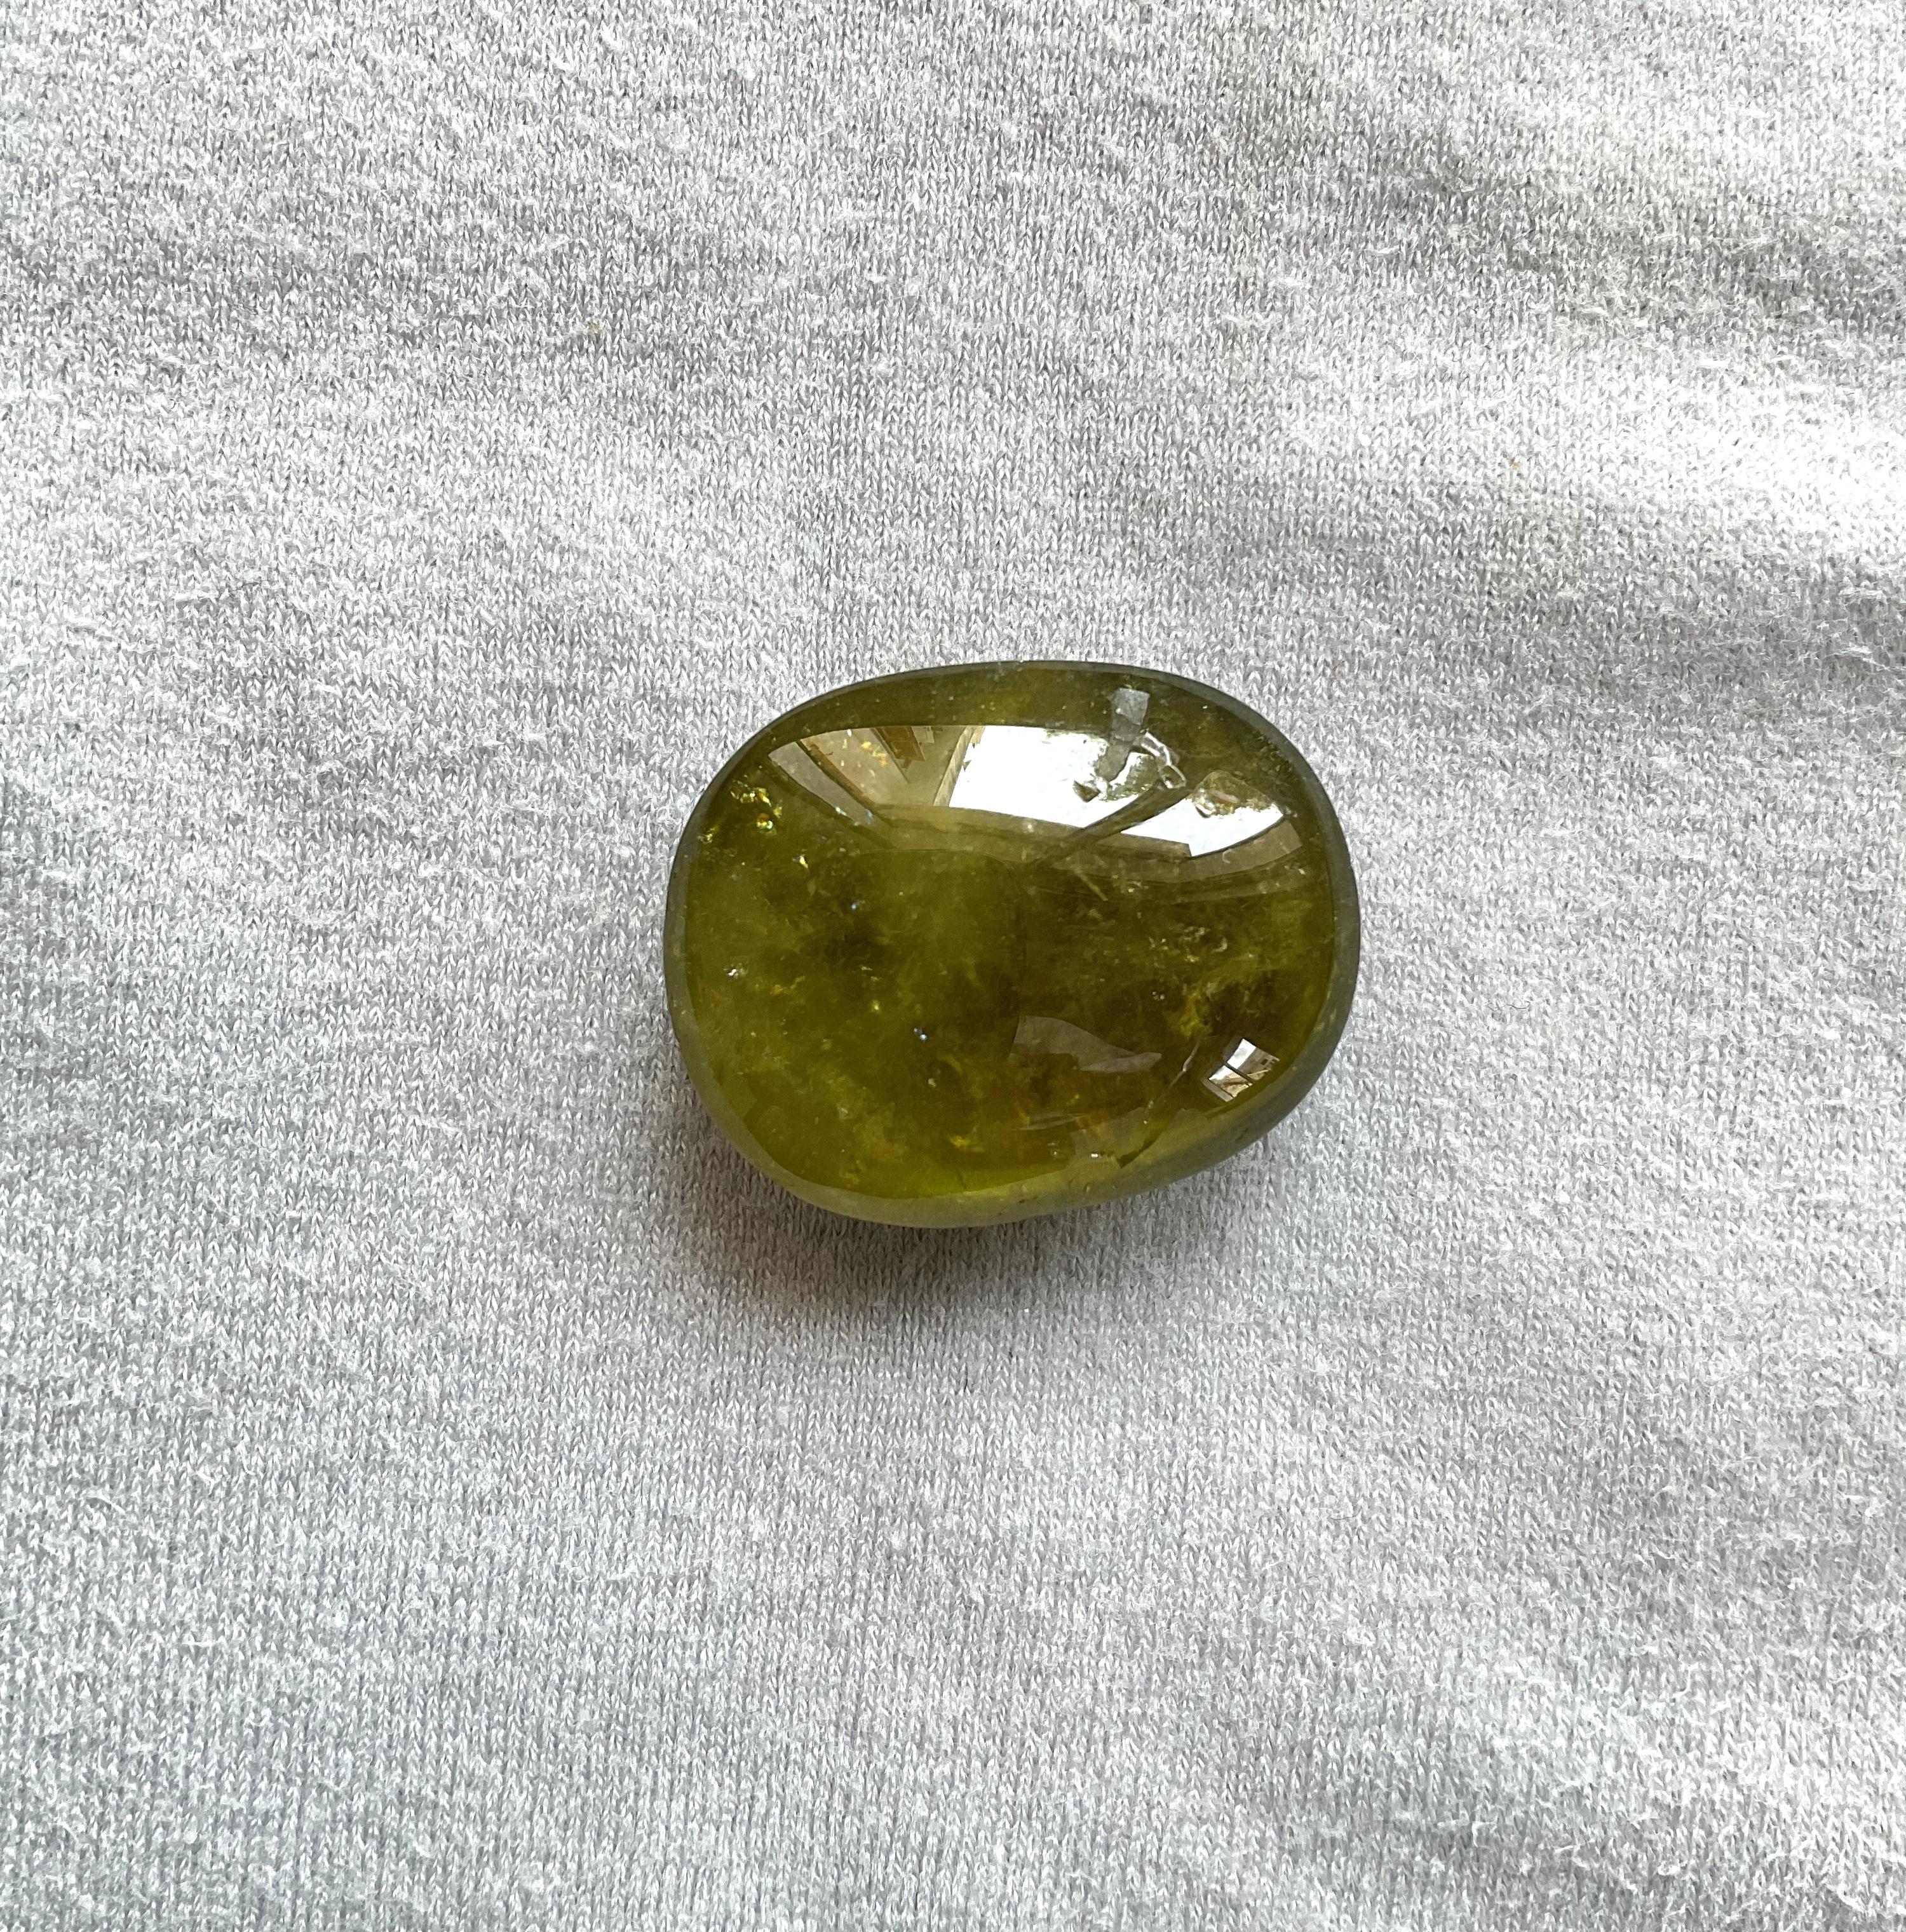 93.06 Carats Green Tourmaline Plain Tumbled Loose Gemstone Fine Jewelry Natural For Sale 1